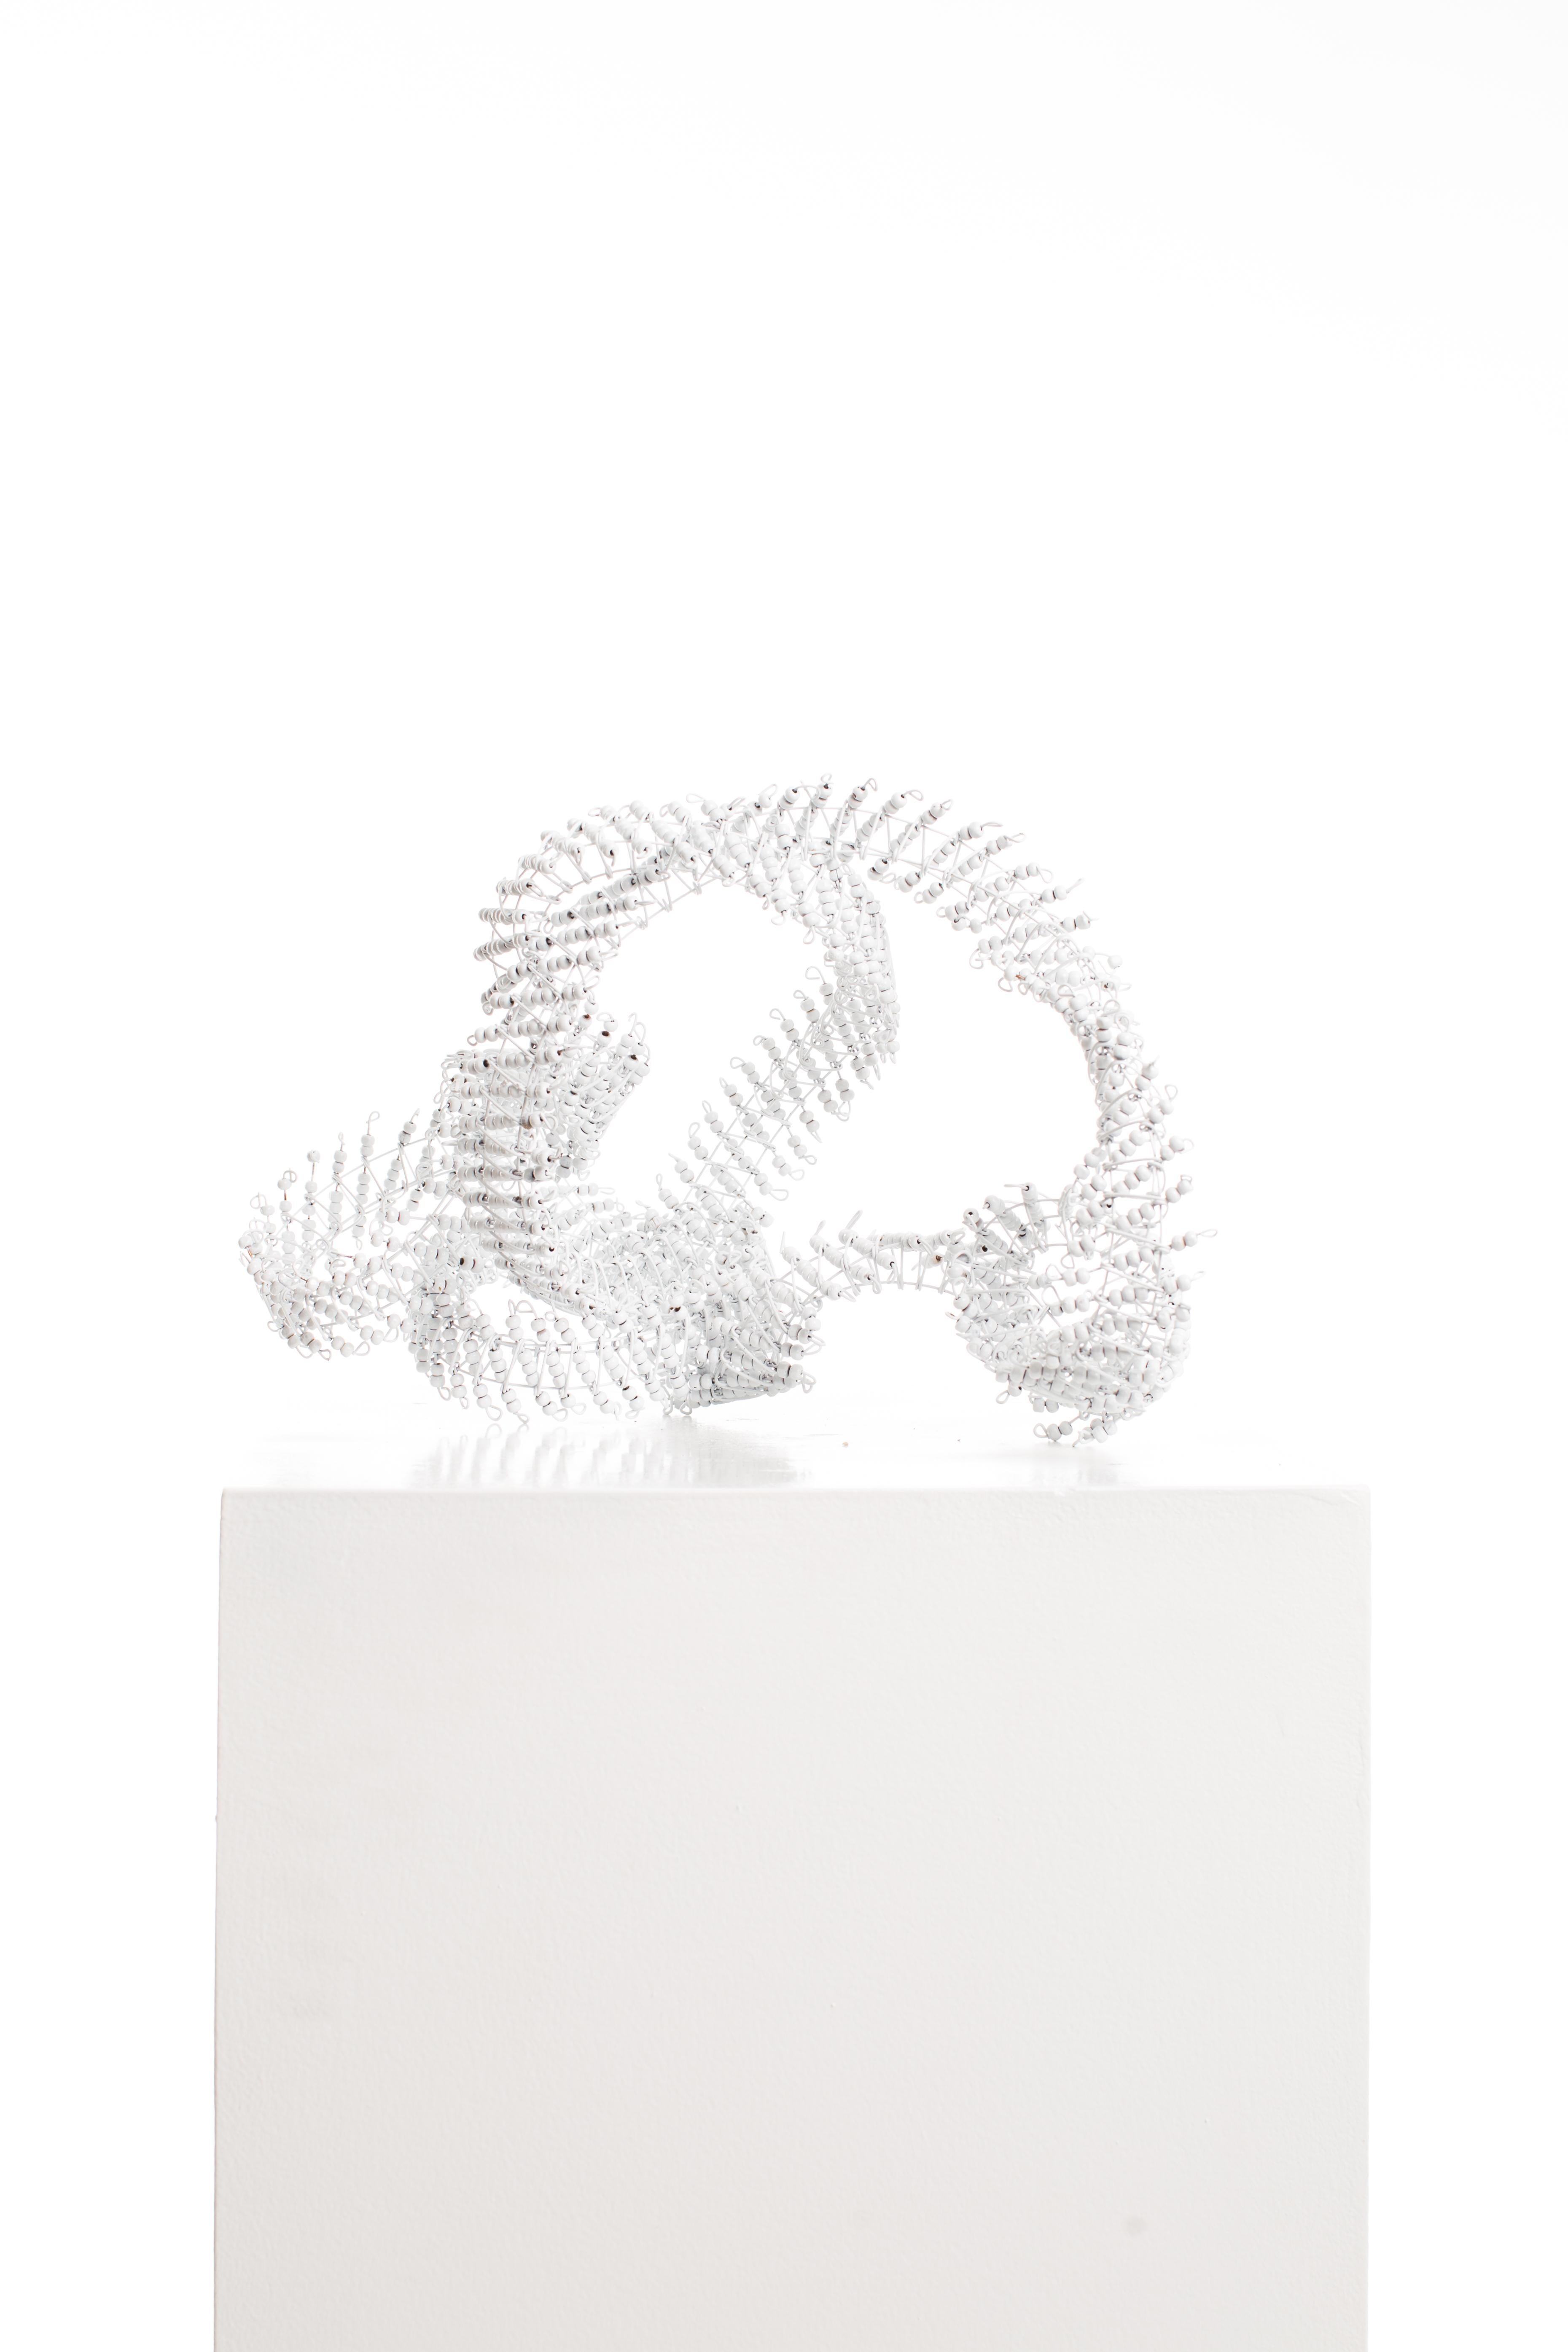 Beaded Whisp 005
White
1/1
Stainless Steel, Wooden Painted Beads 
40cm x 30cm x 25cm
0.55Kg 

Whisps are meticulously constructed organic sculptural expressions. These expressions are symbolic of what the mind feels like to artist Driaan Claassen as